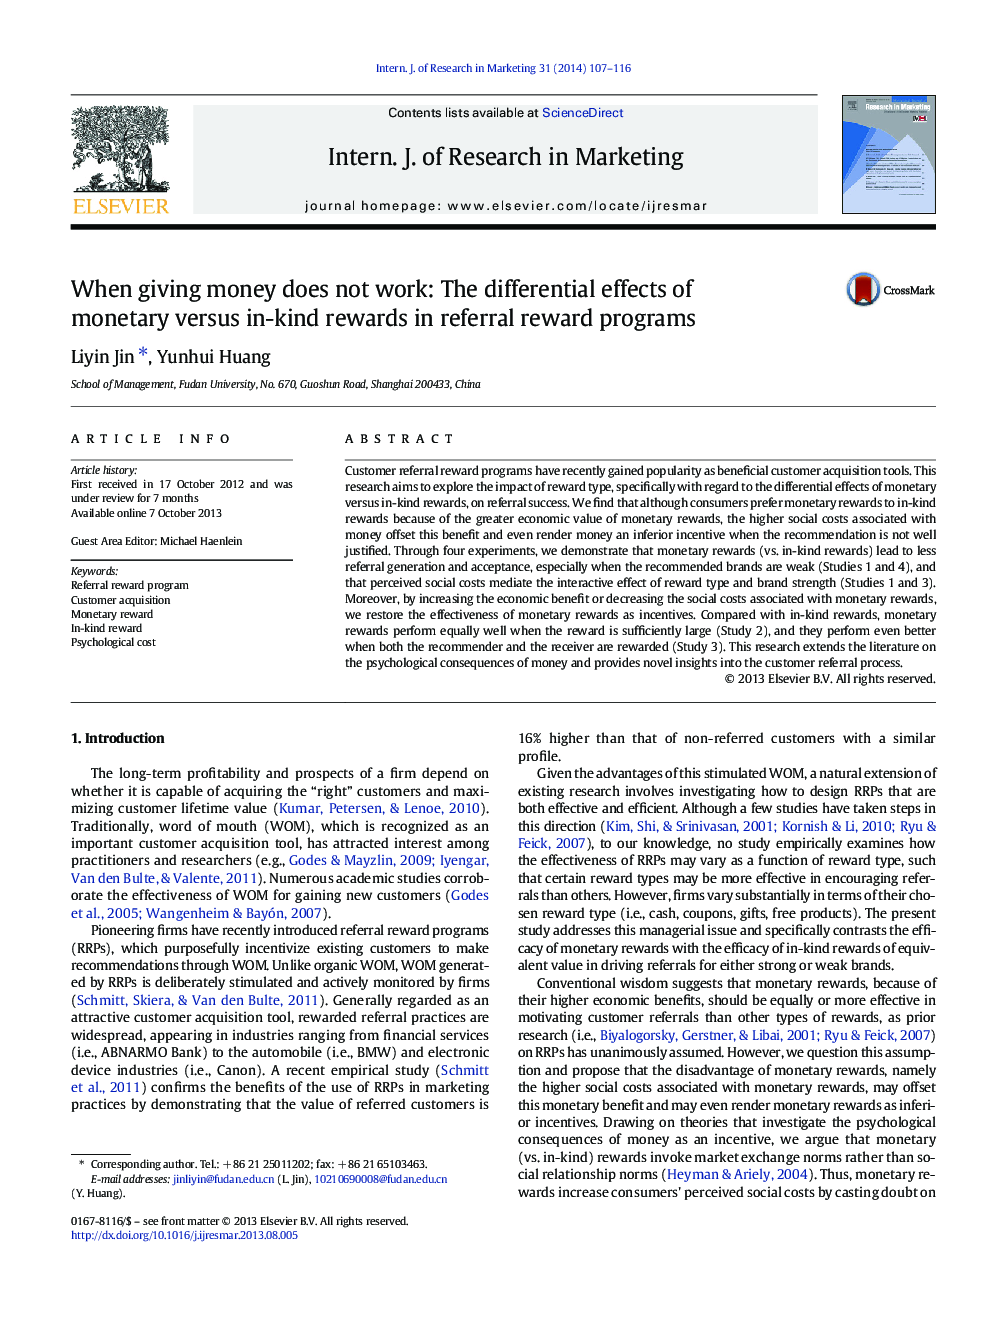 When giving money does not work: The differential effects of monetary versus in-kind rewards in referral reward programs